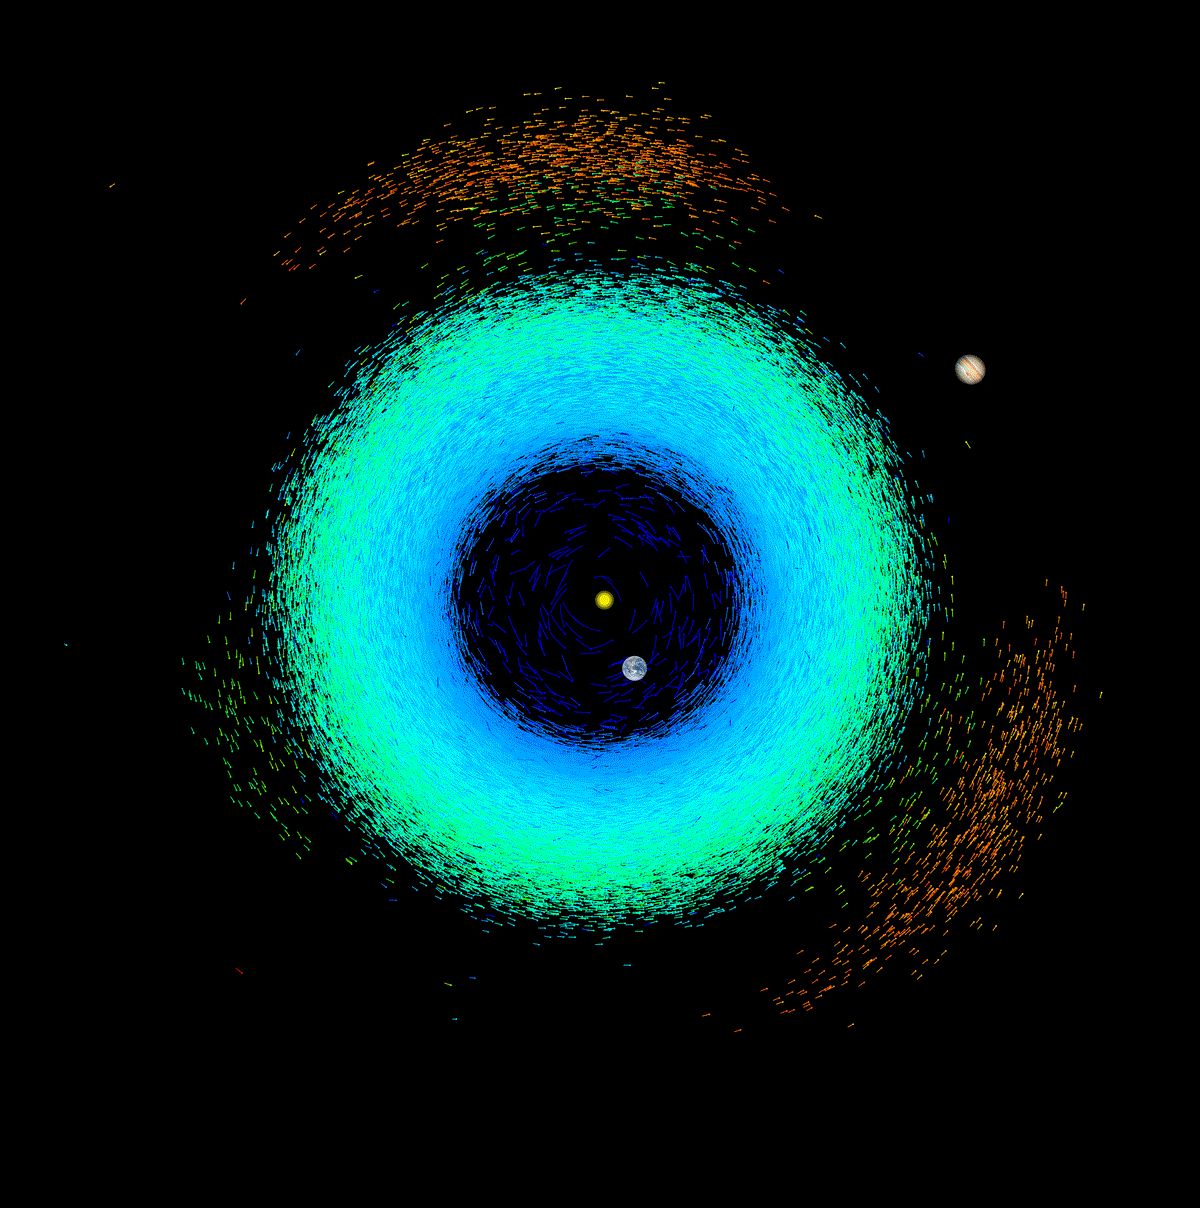 Asteroids around the Sun as seen by Gaia. Each asteroid is a segment representing its motion over 10 days (with the blue band representing the inner solar system). ESA/Gaia/DPAC, CC BY-ND